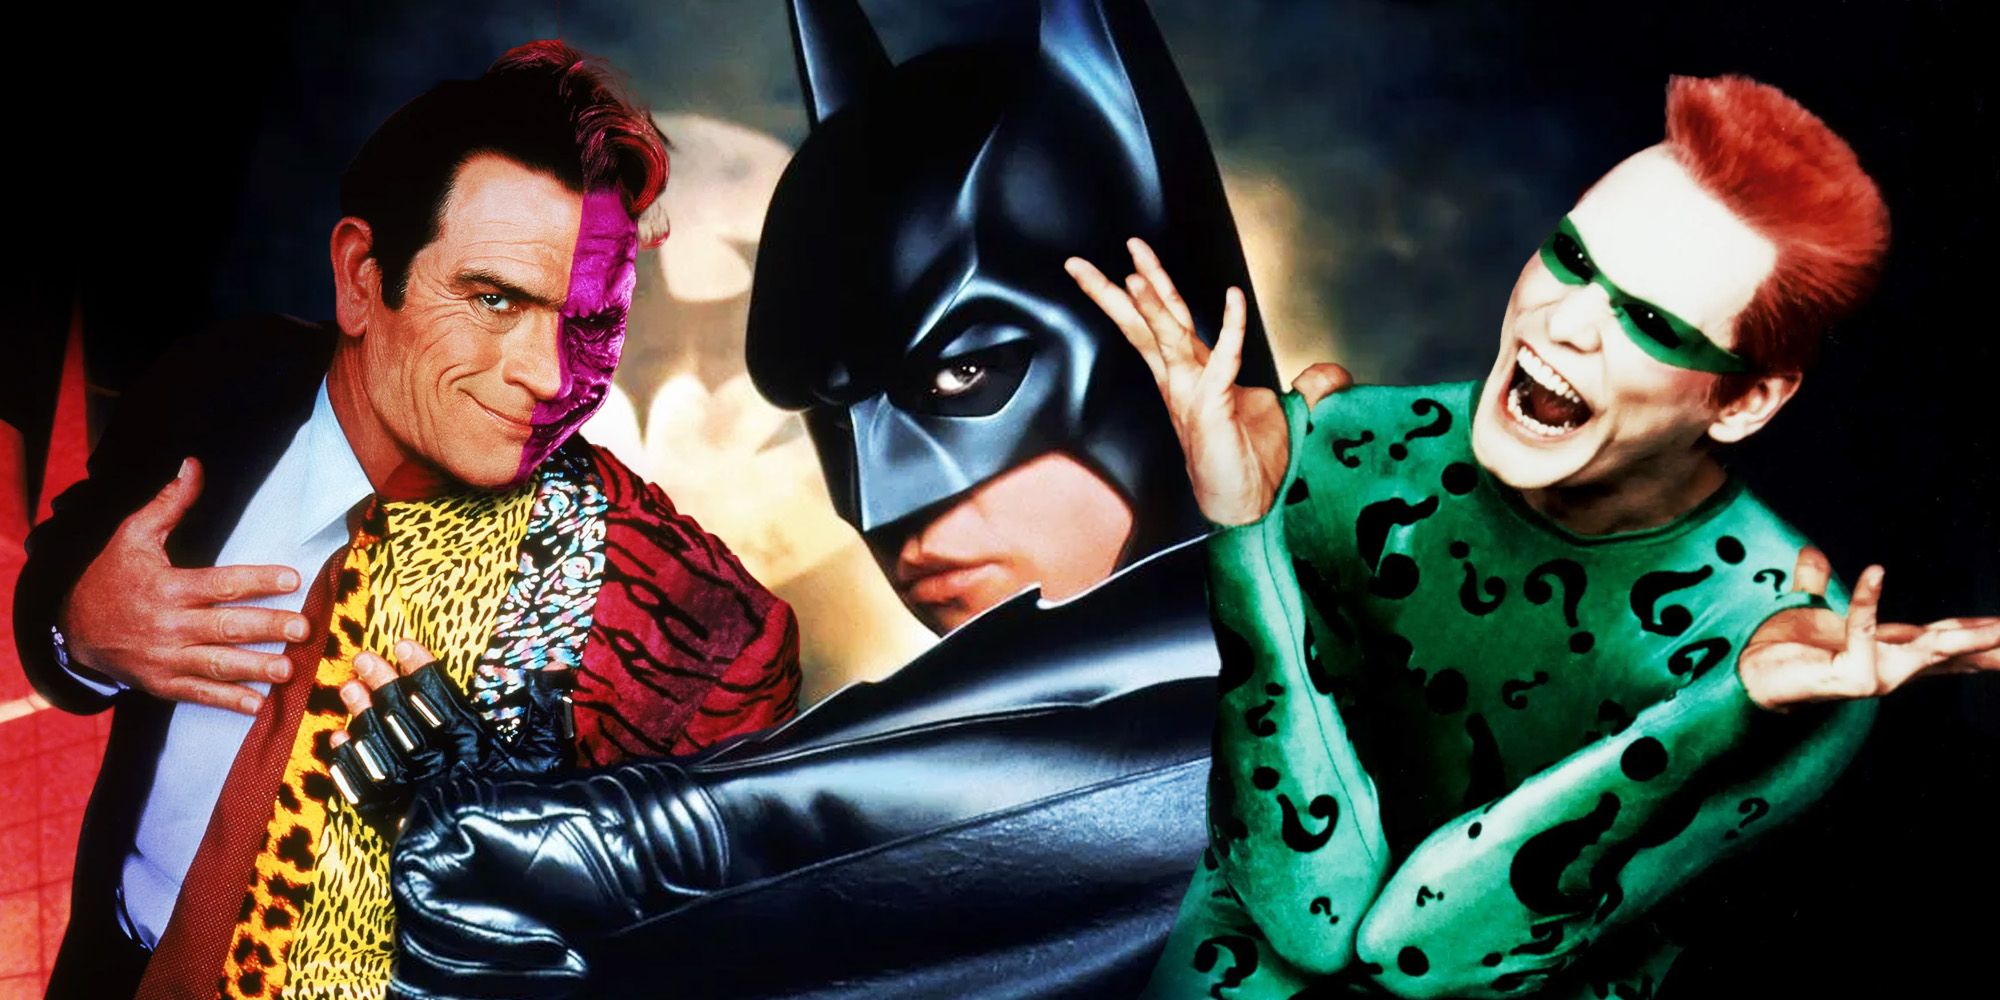 genius-batman-forever-writer-discusses-robin-williams-lost-riddler-role